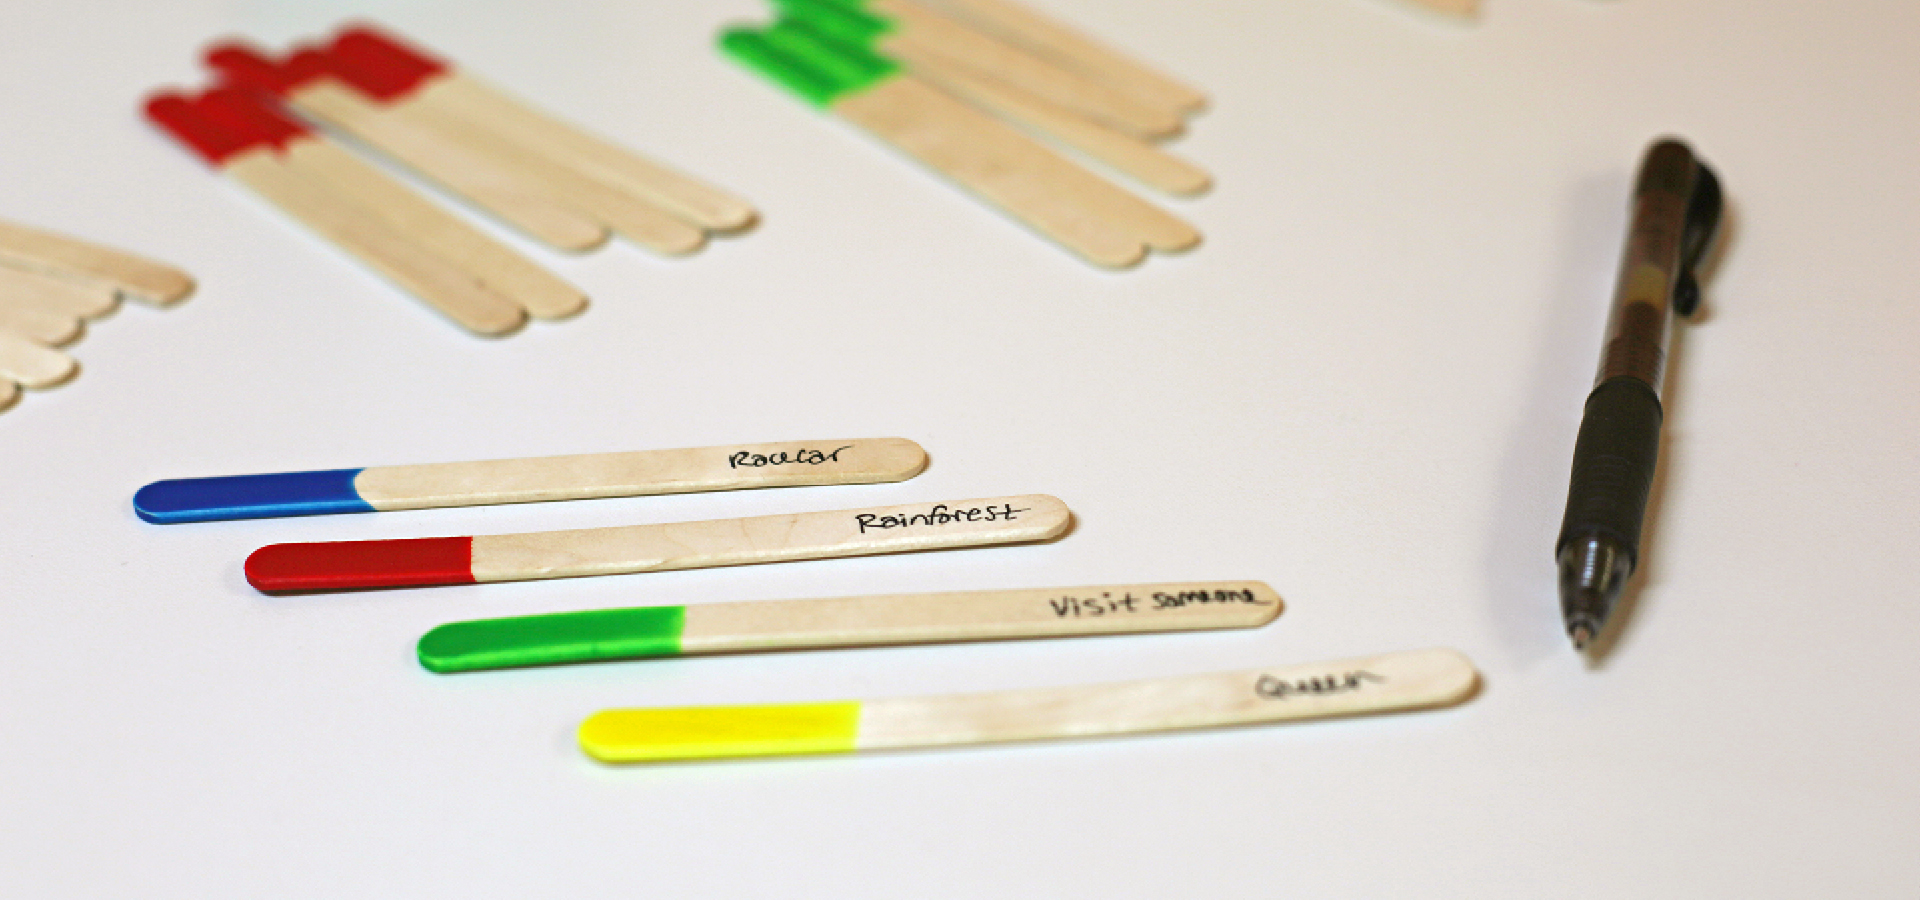 Colorful popsicle sticks with black pen